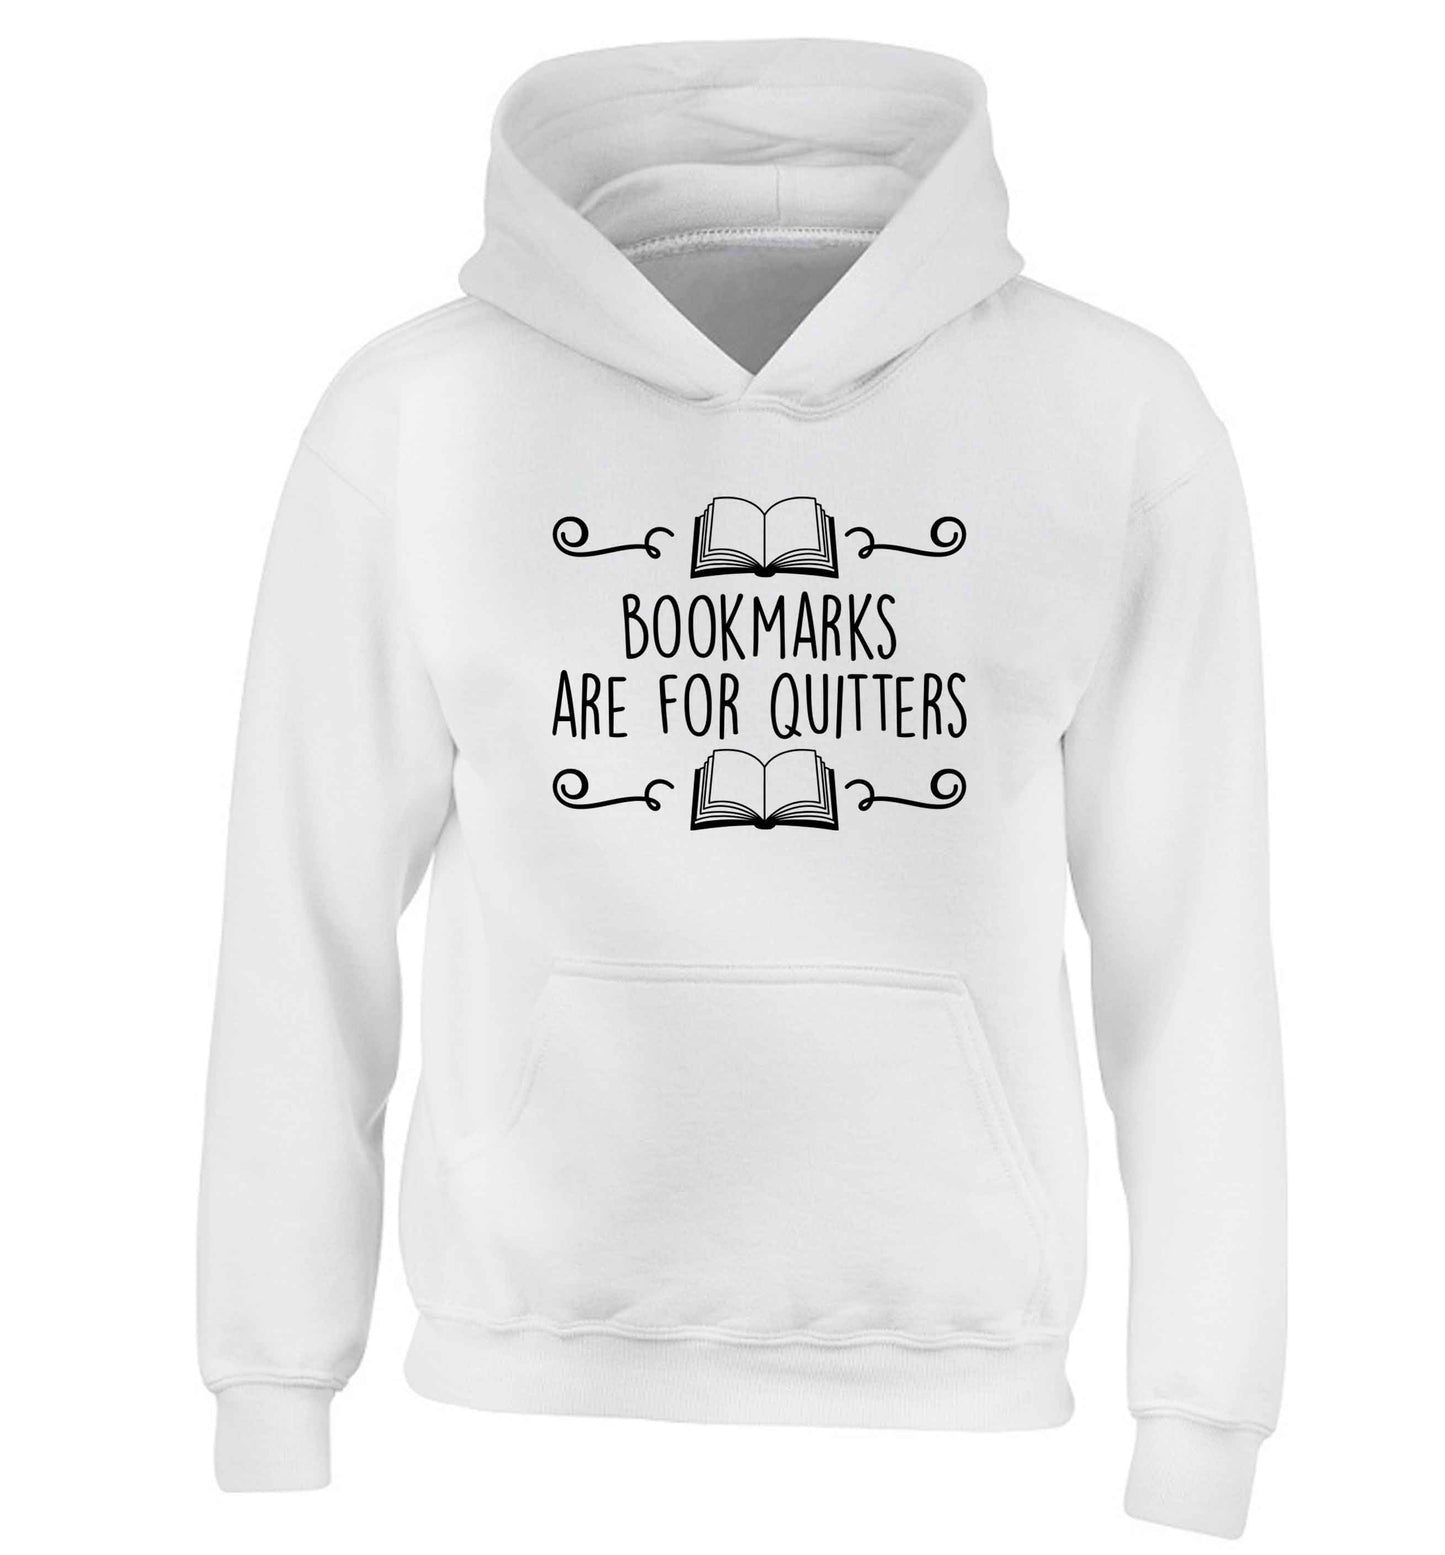 Bookmarks are for quitters children's white hoodie 12-13 Years